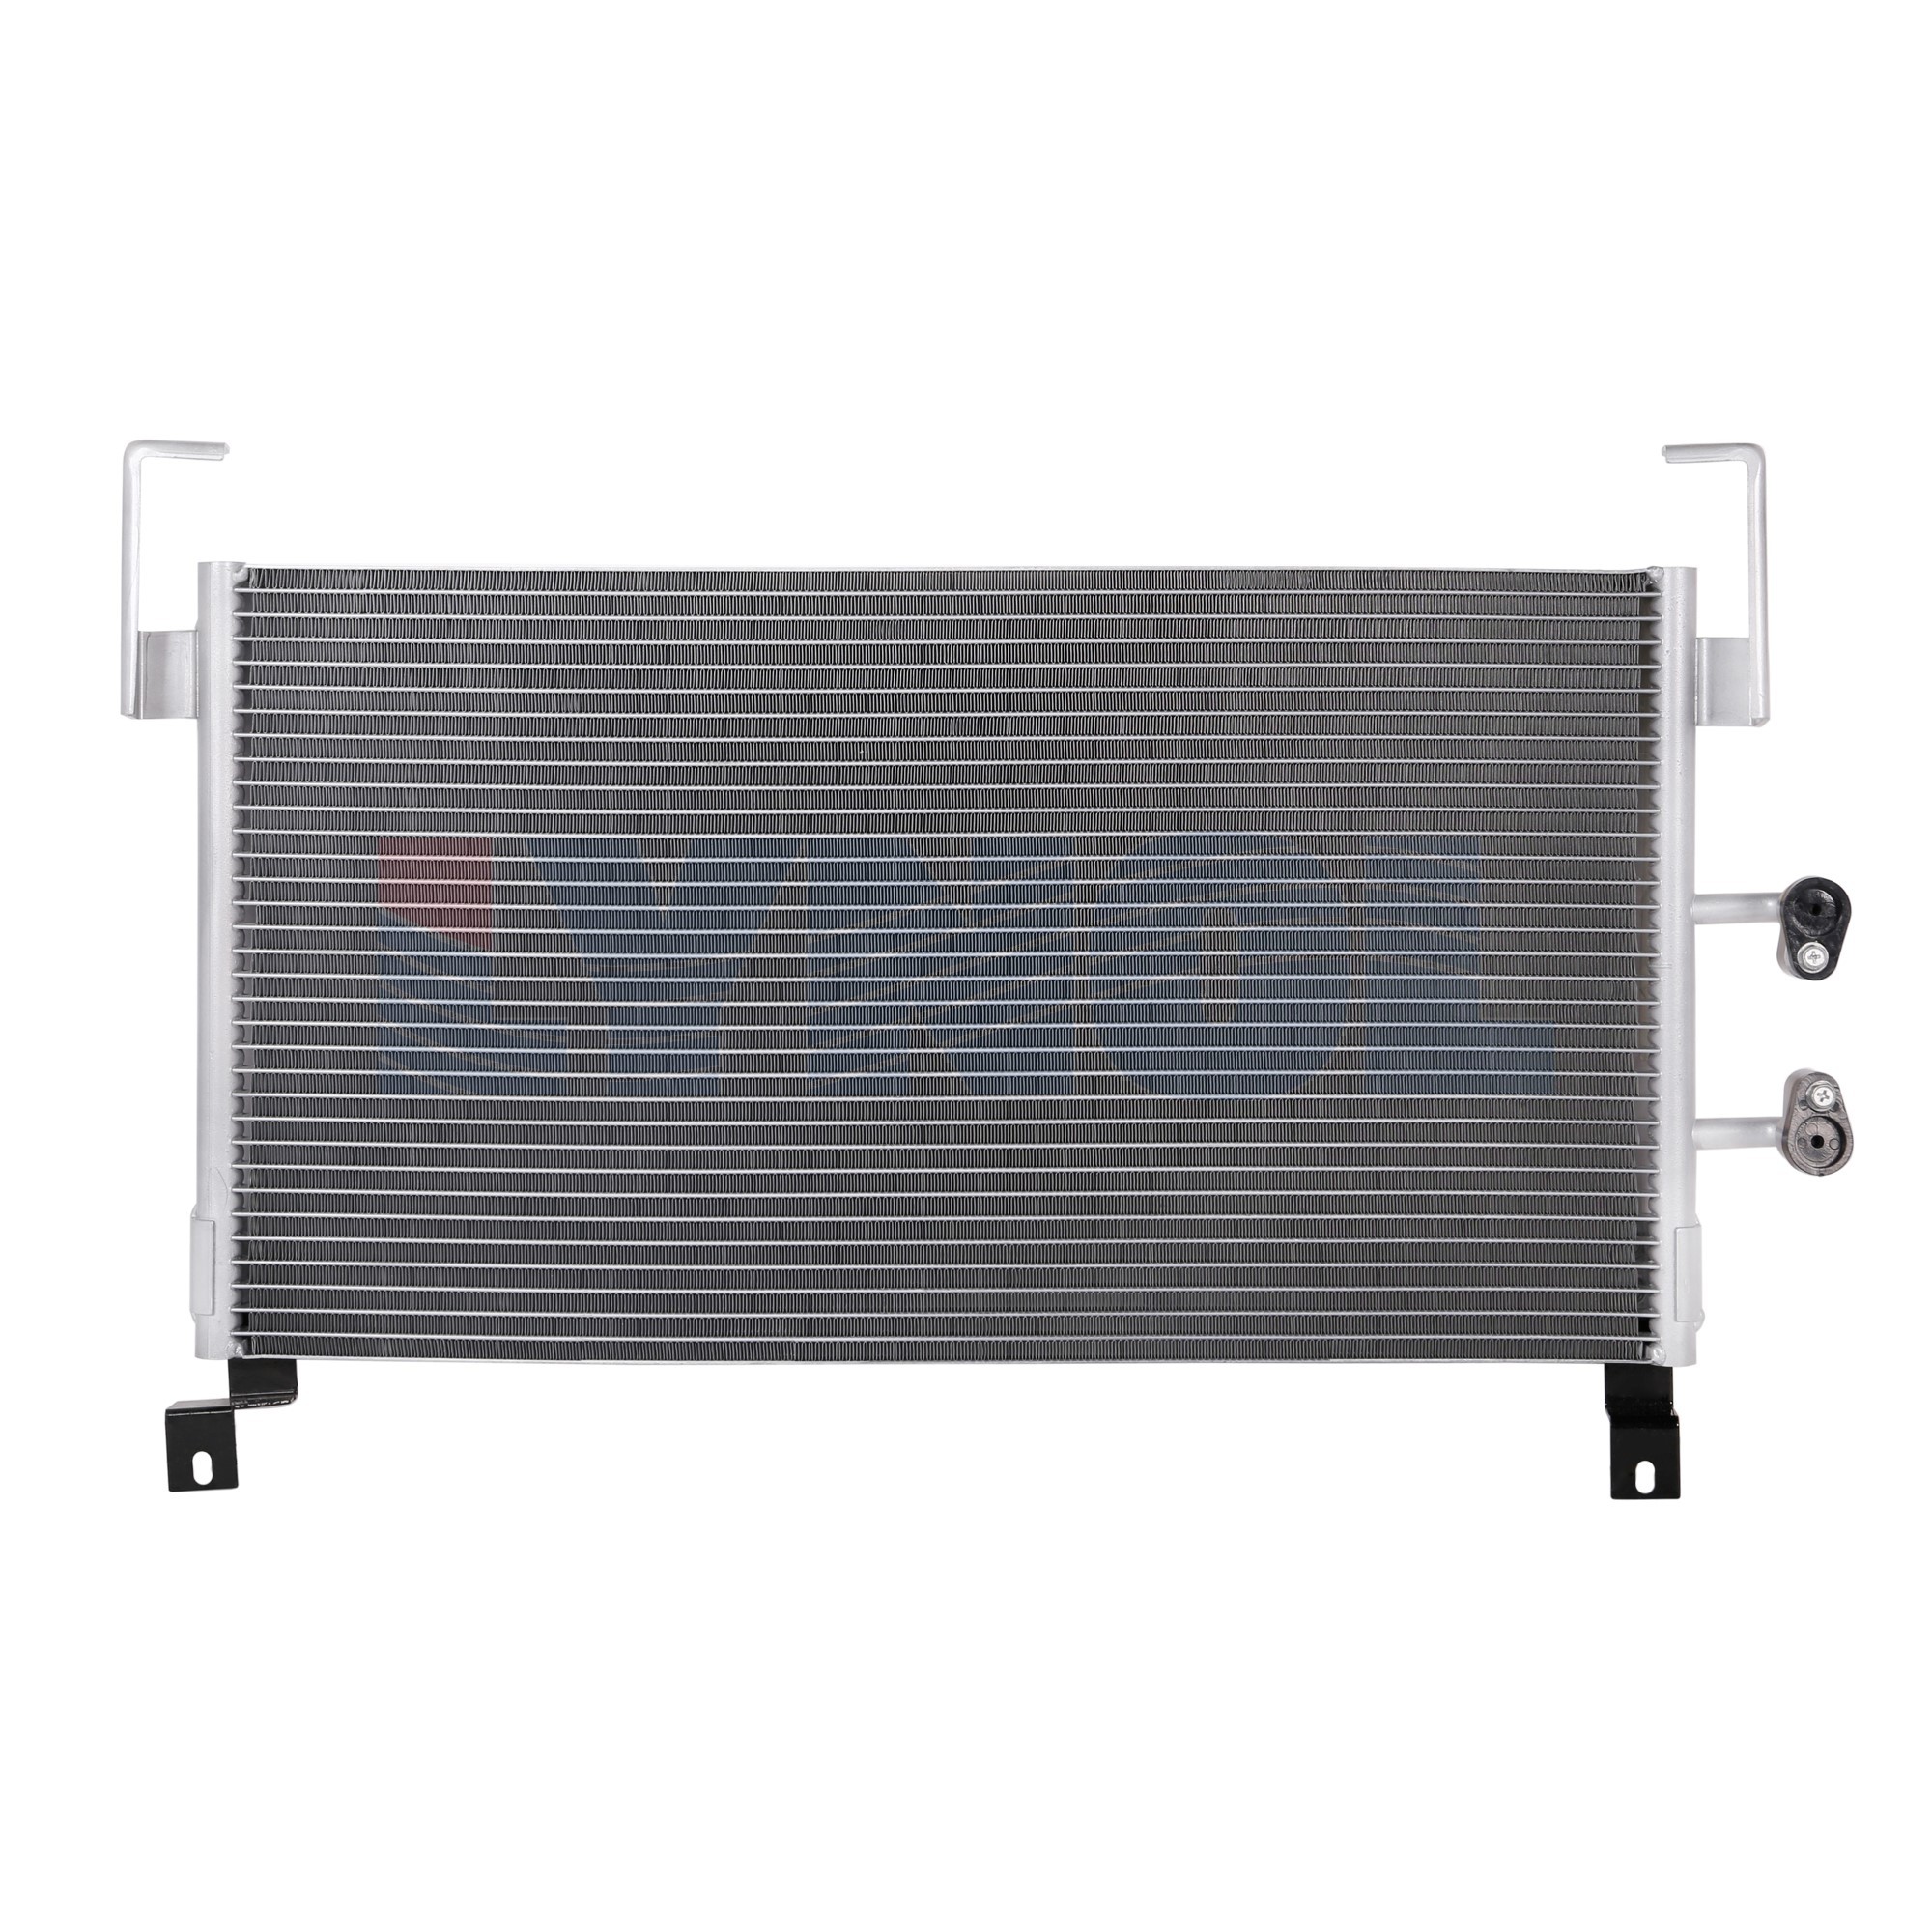 Plymouth Neon A/C Condenser & Radiator Kit for Dodge Neon